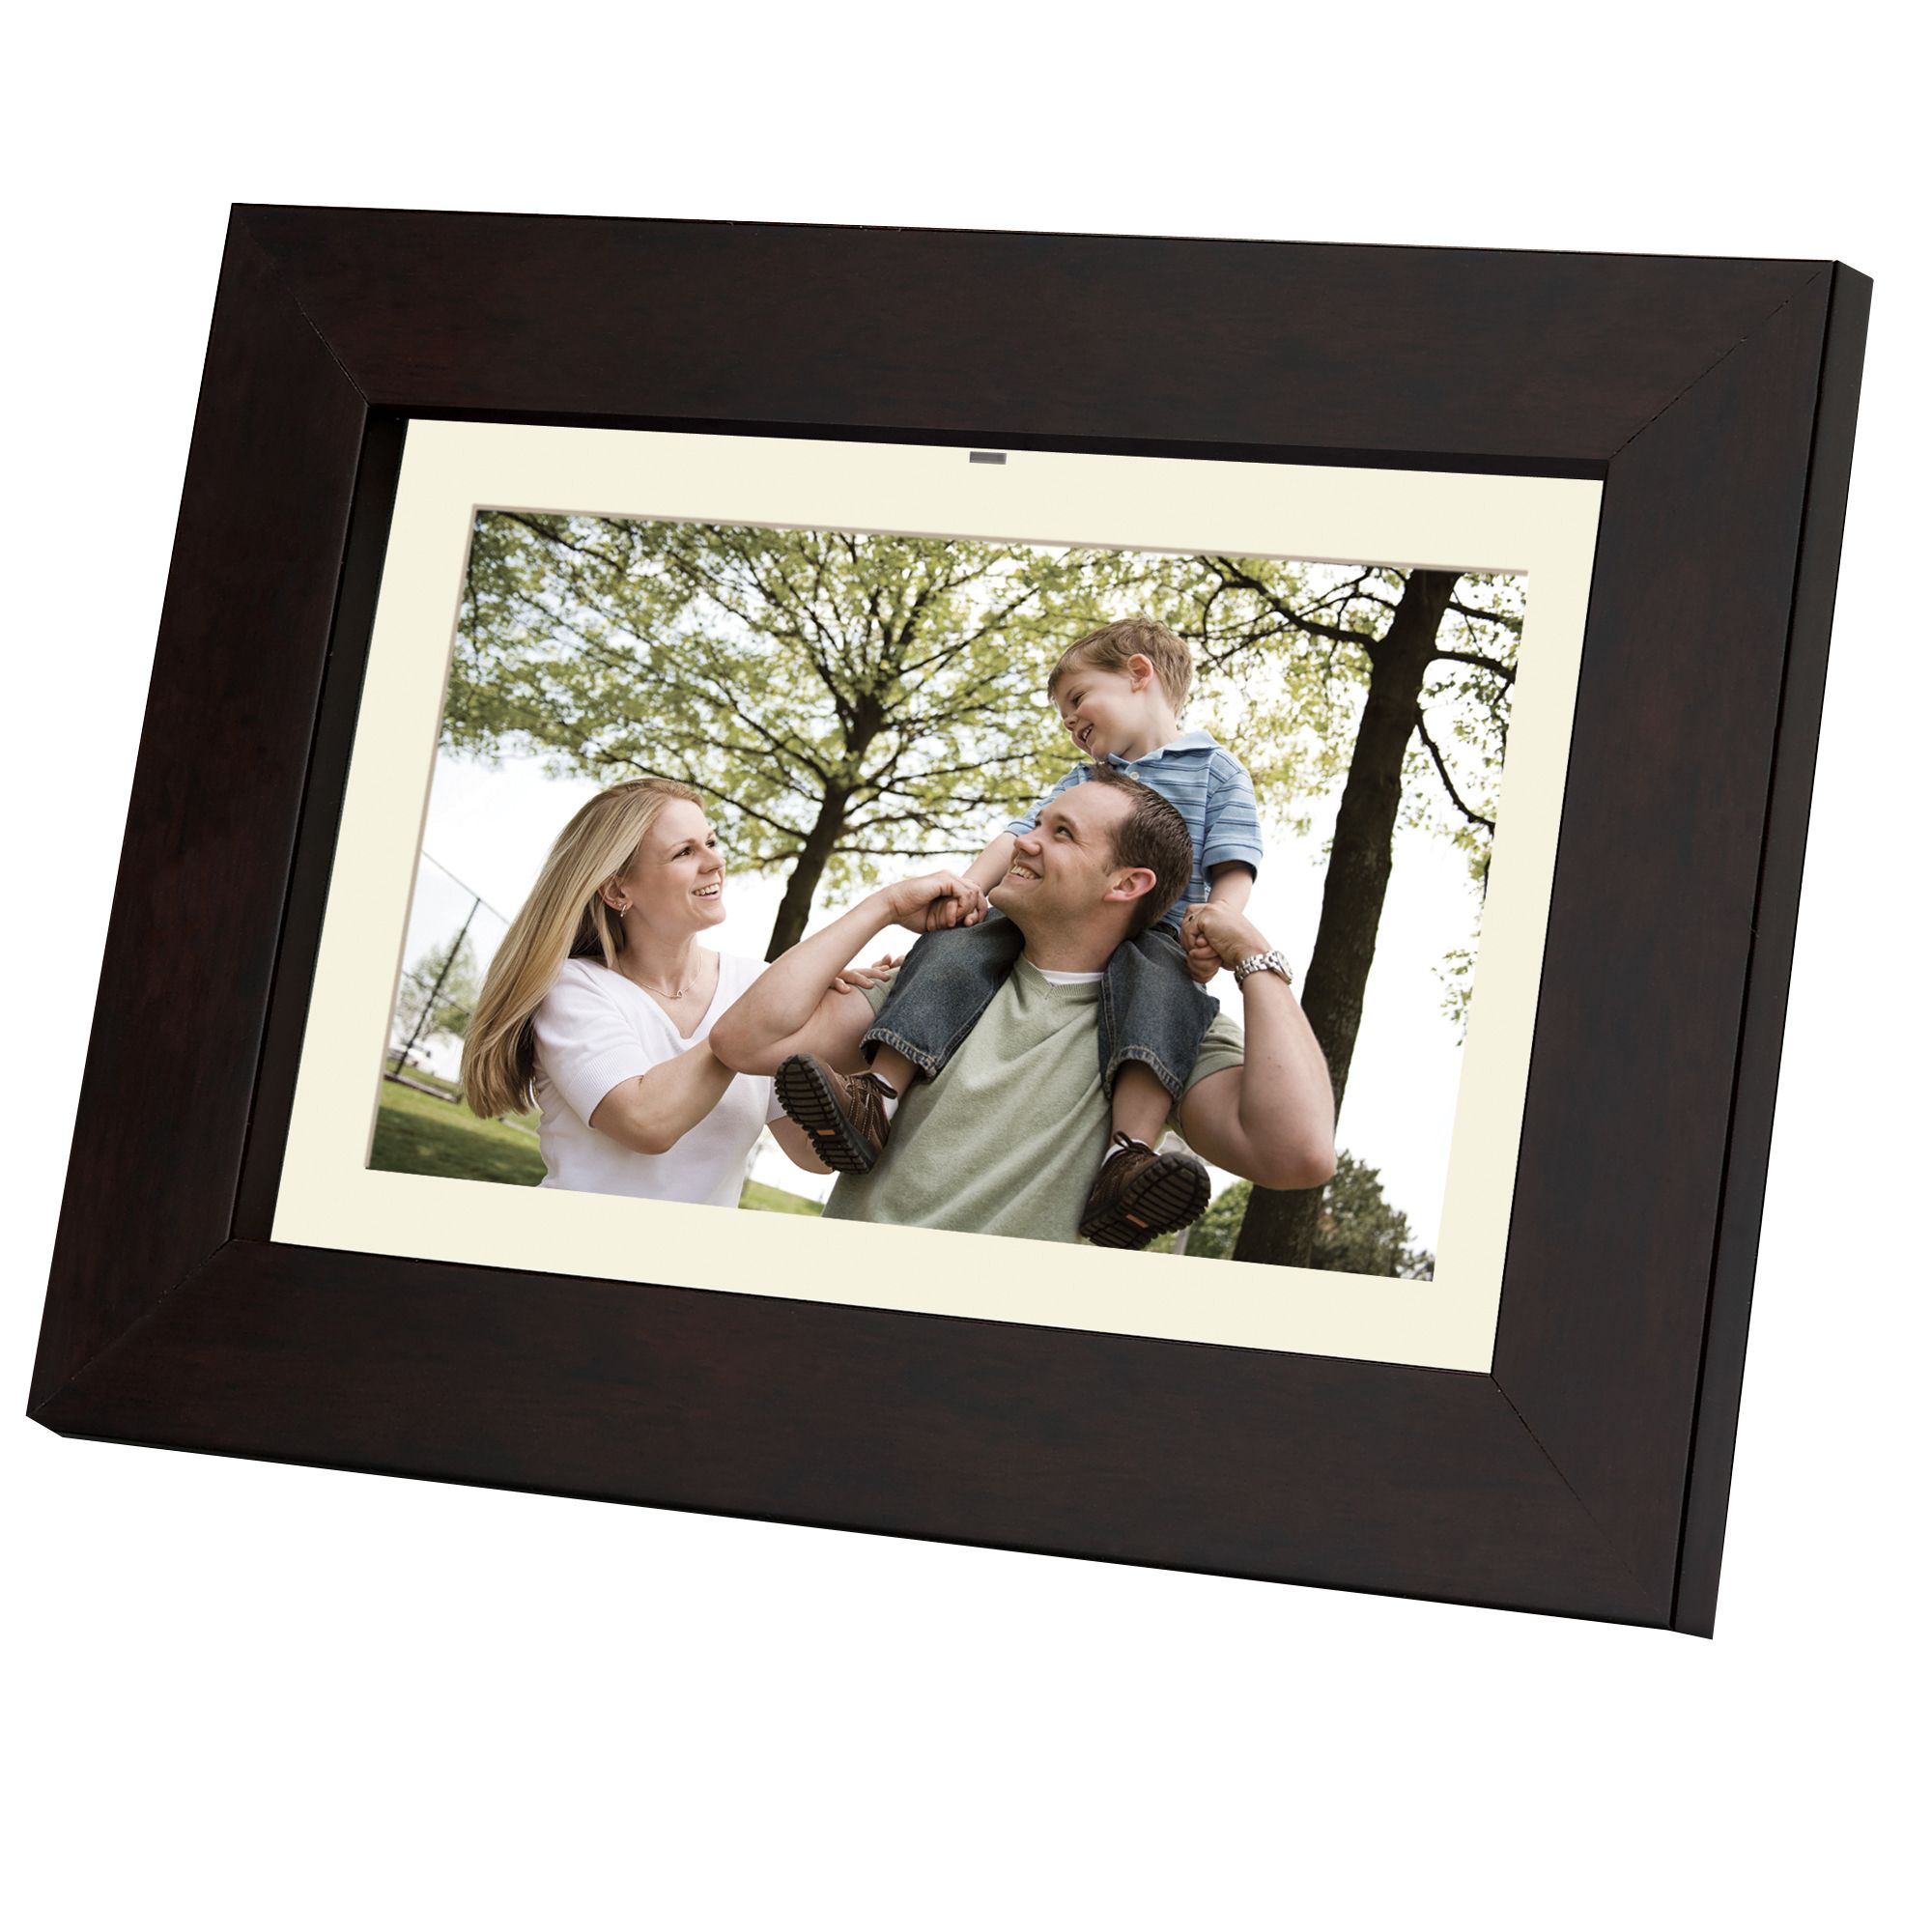 Coby DP702 7 in. (Diagonal) Widescreen Digital Picture Frame w/ Multimedia Playback